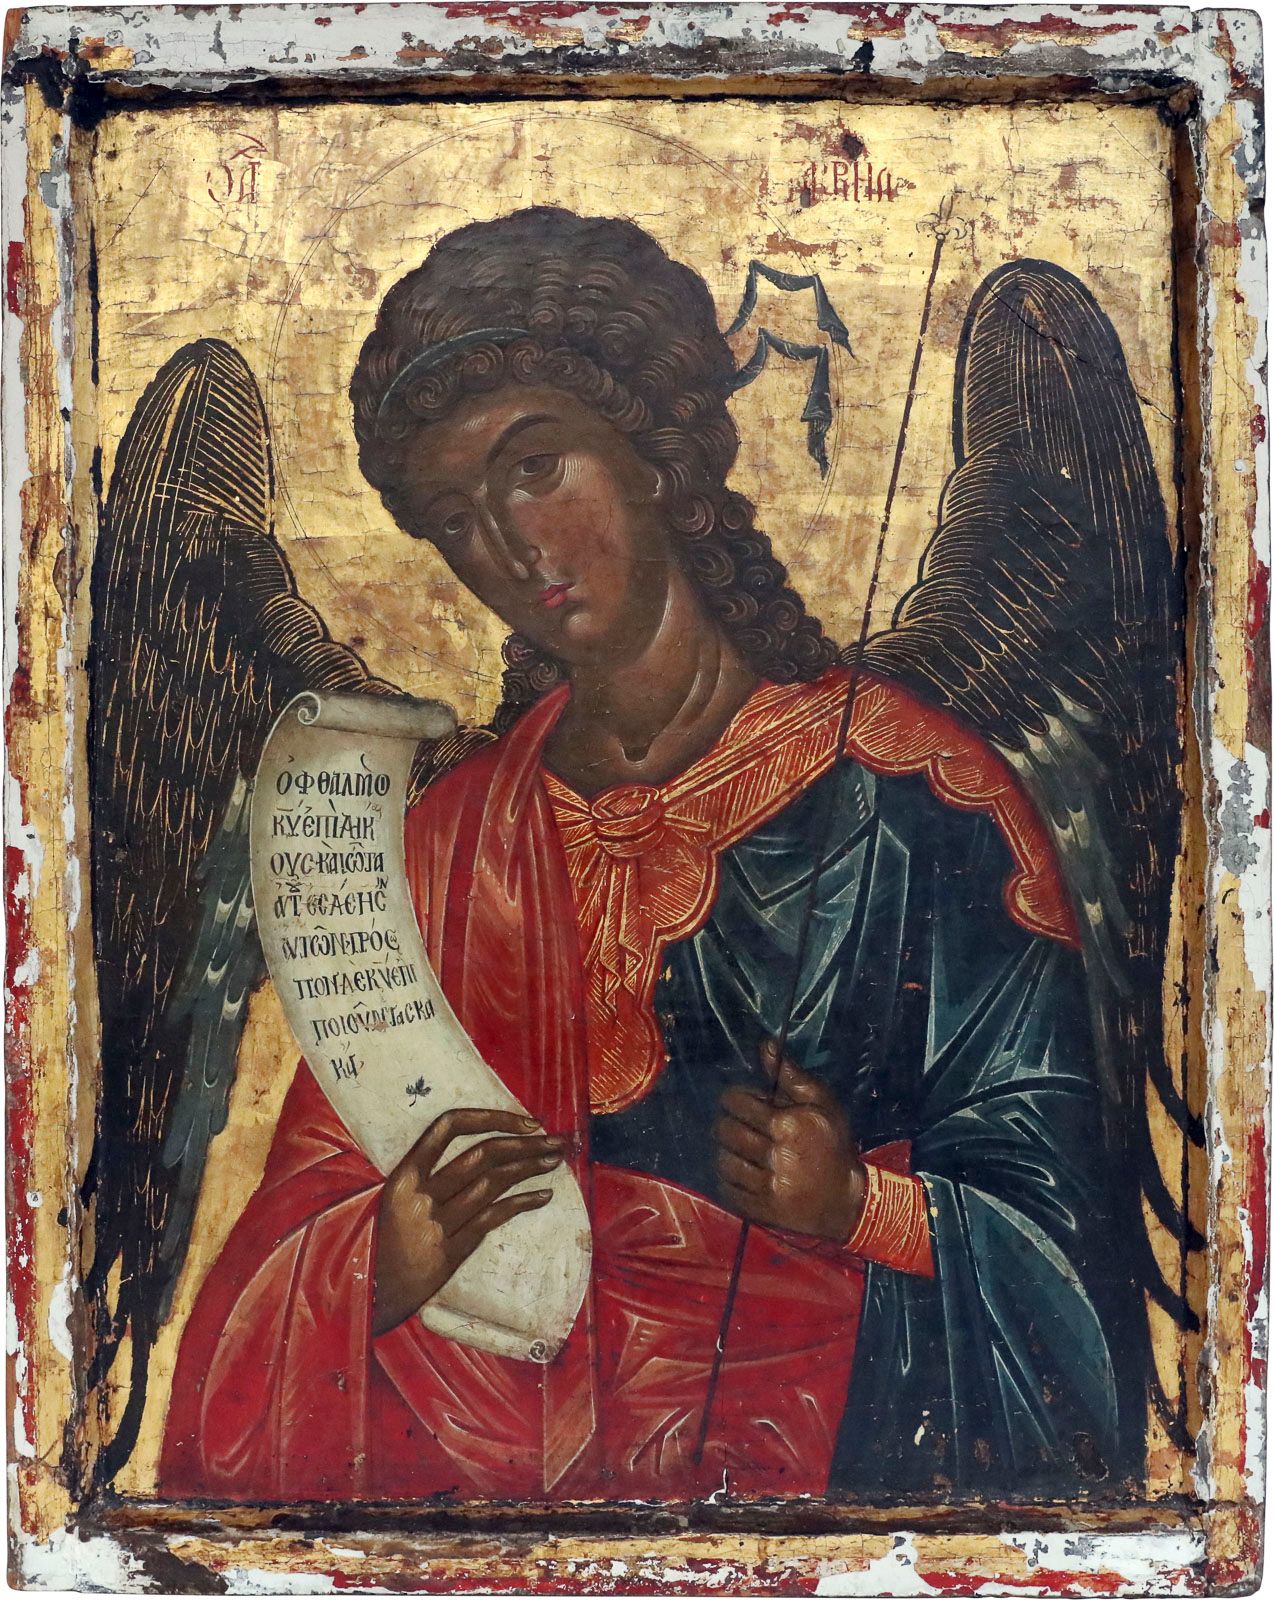 A LARGE ICON SHOWING THE ARCHANGEL GABRIEL * UNA GRANDE ICONA CHE MOSTRA L'ARCAN&hellip;